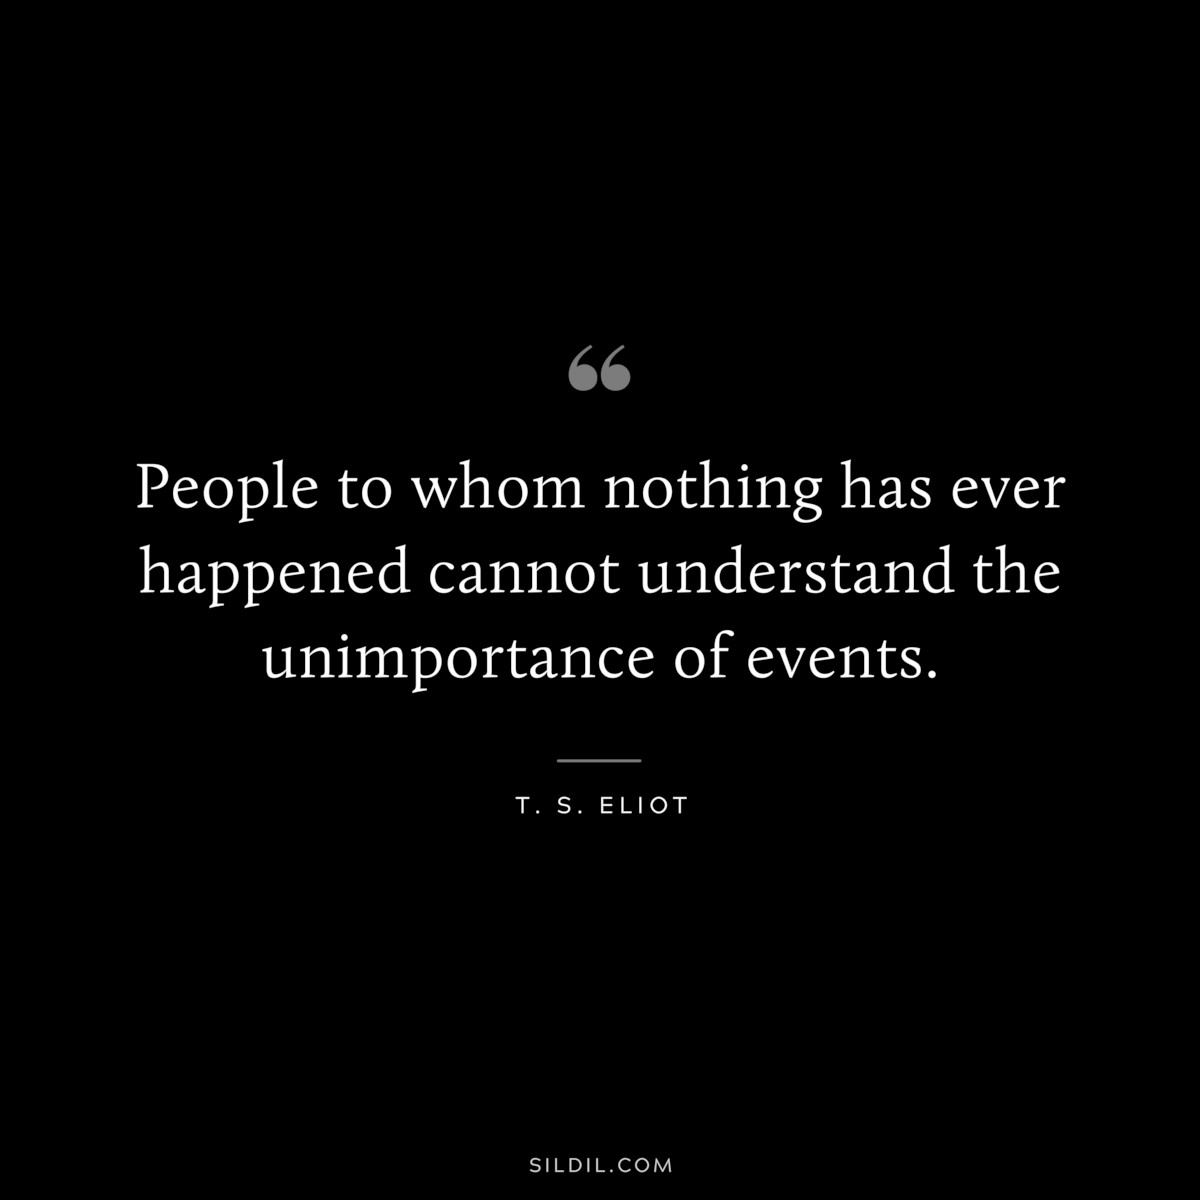 People to whom nothing has ever happened cannot understand the unimportance of events. ― T. S. Eliot